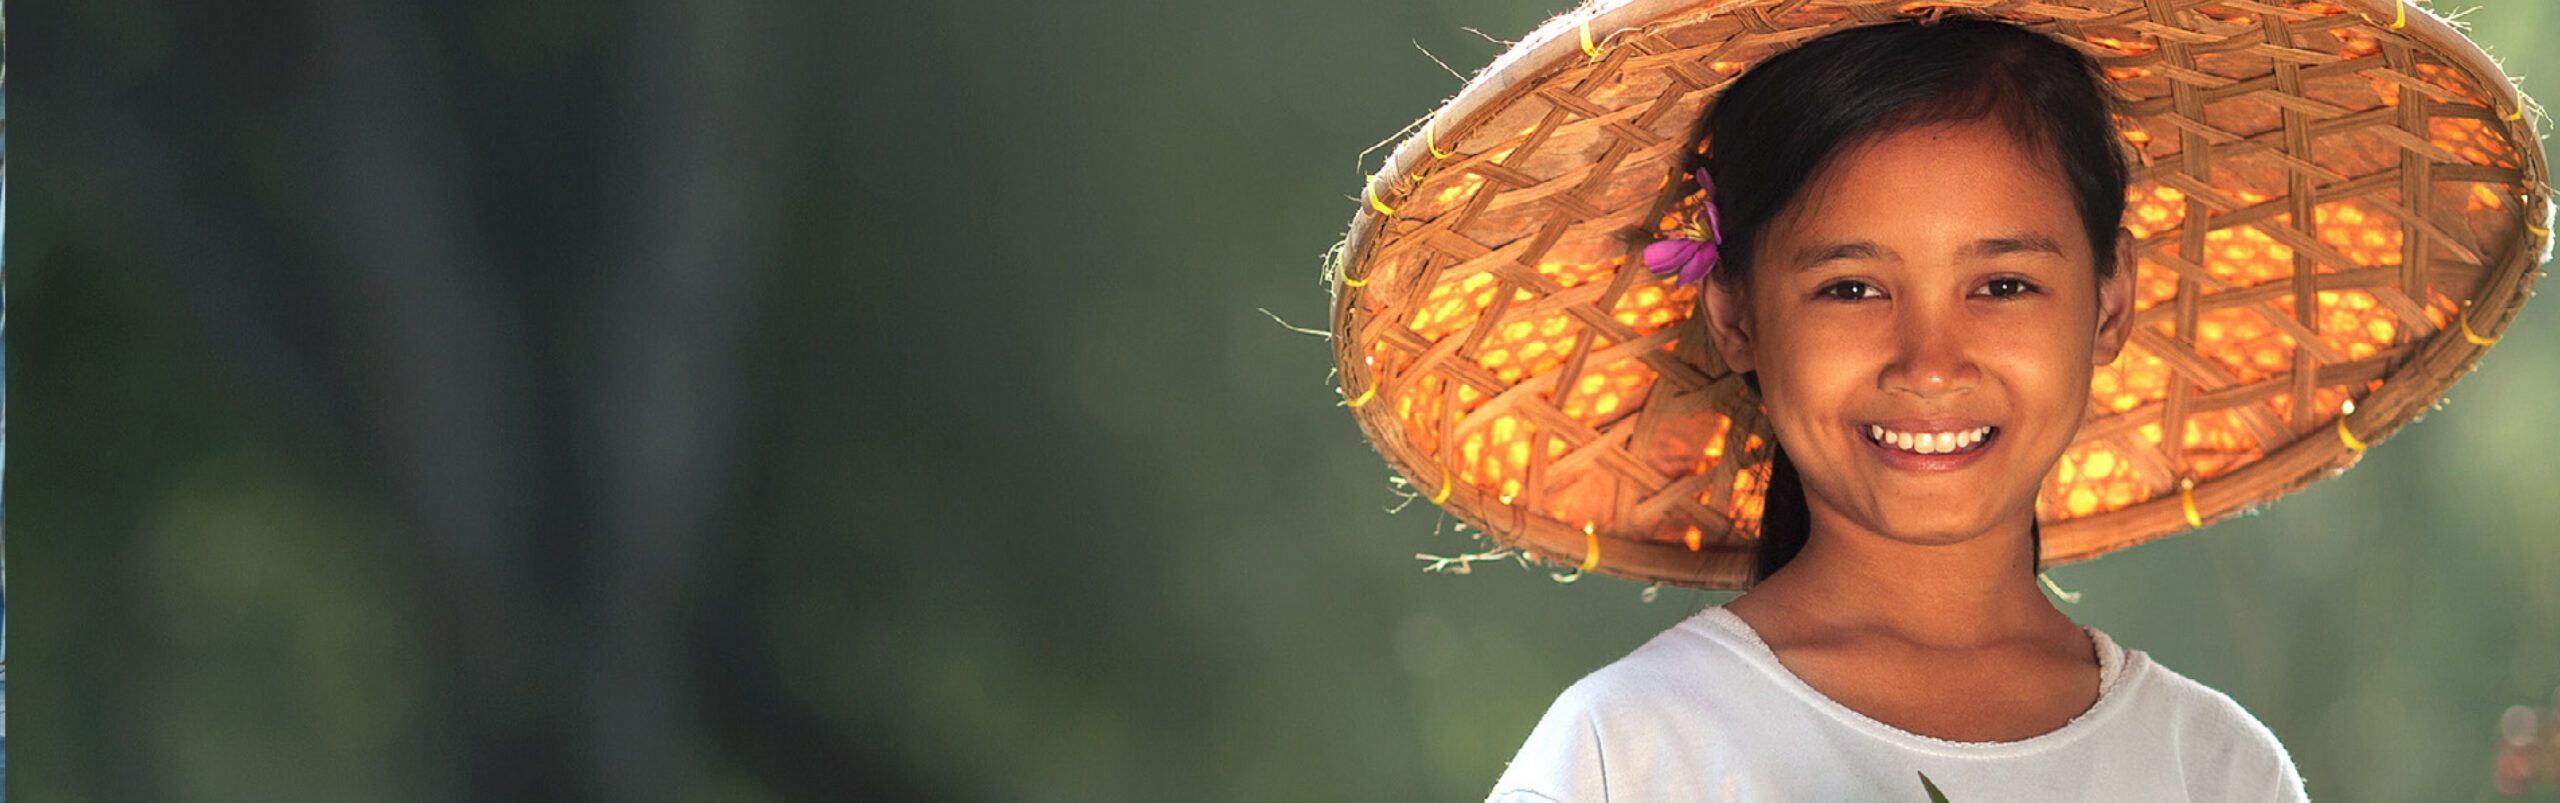 Dariu Foundation - Header - About us - Girl with hat